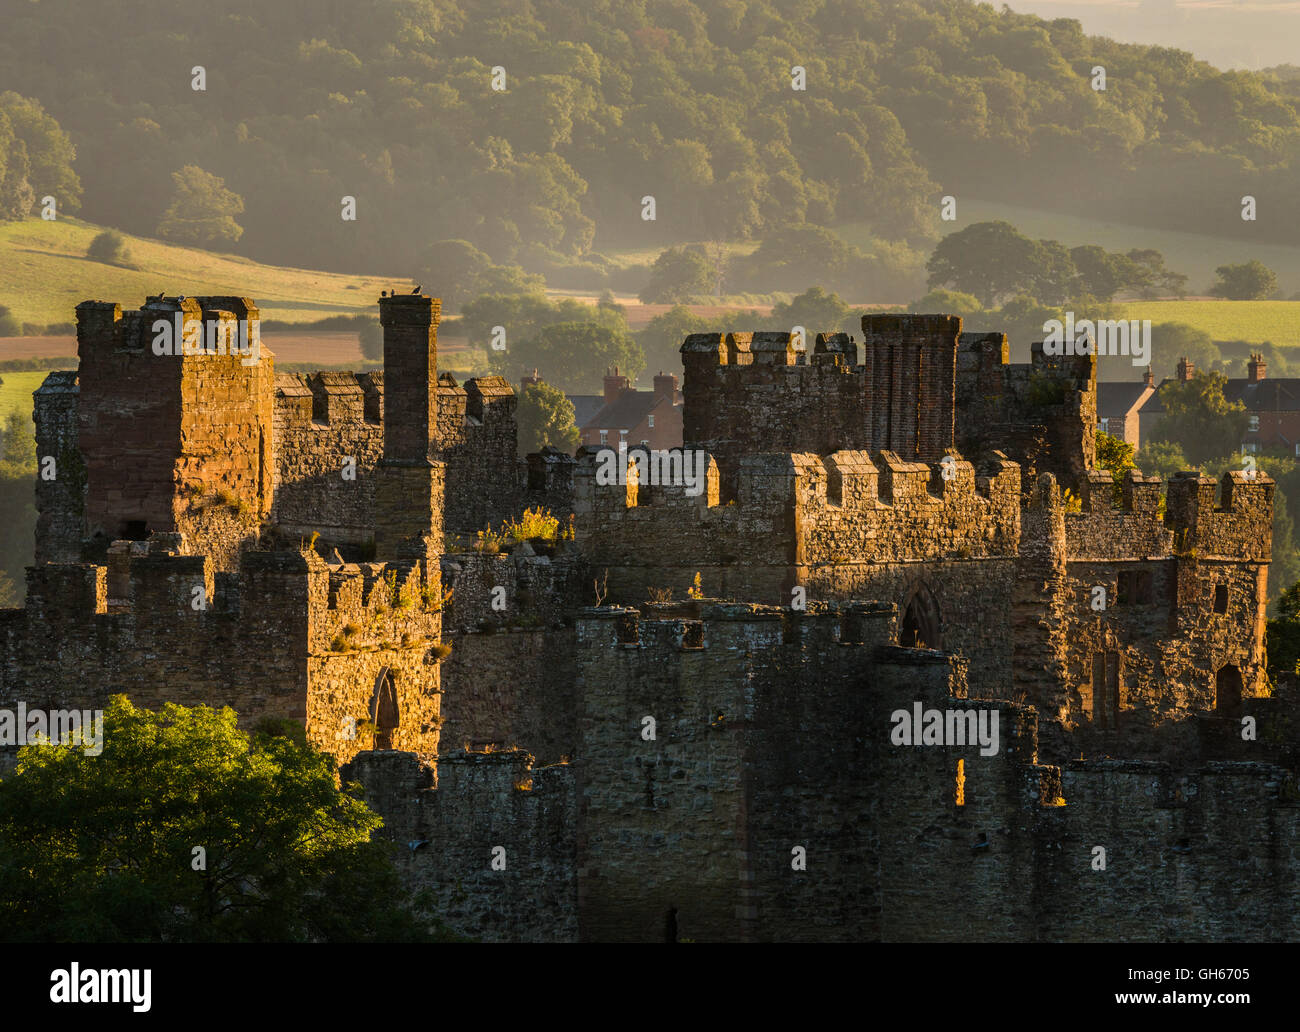 Early morning light highlights the stone walls of Ludlow Castle in Shropshire, England, UK. Stock Photo